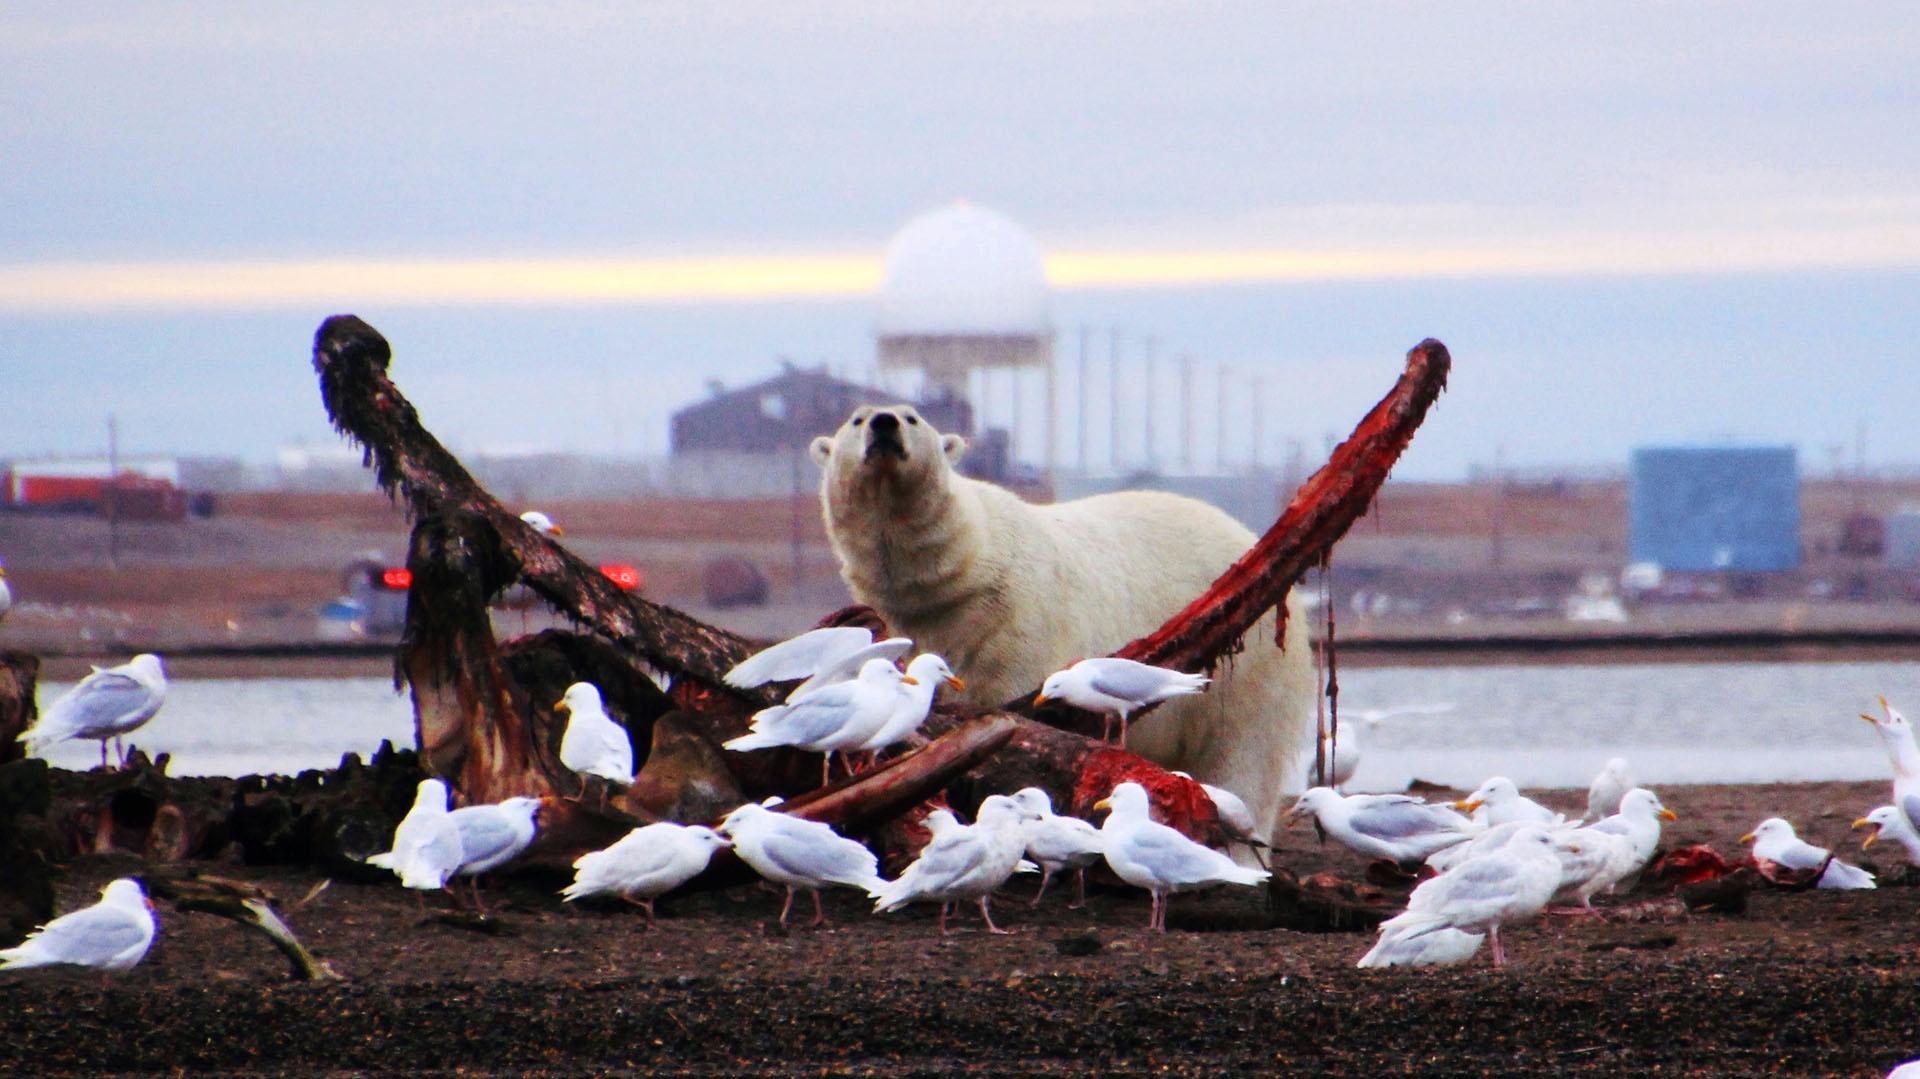 A polar bear eats at the Bone Pile with the town of Kaktovic in the background.